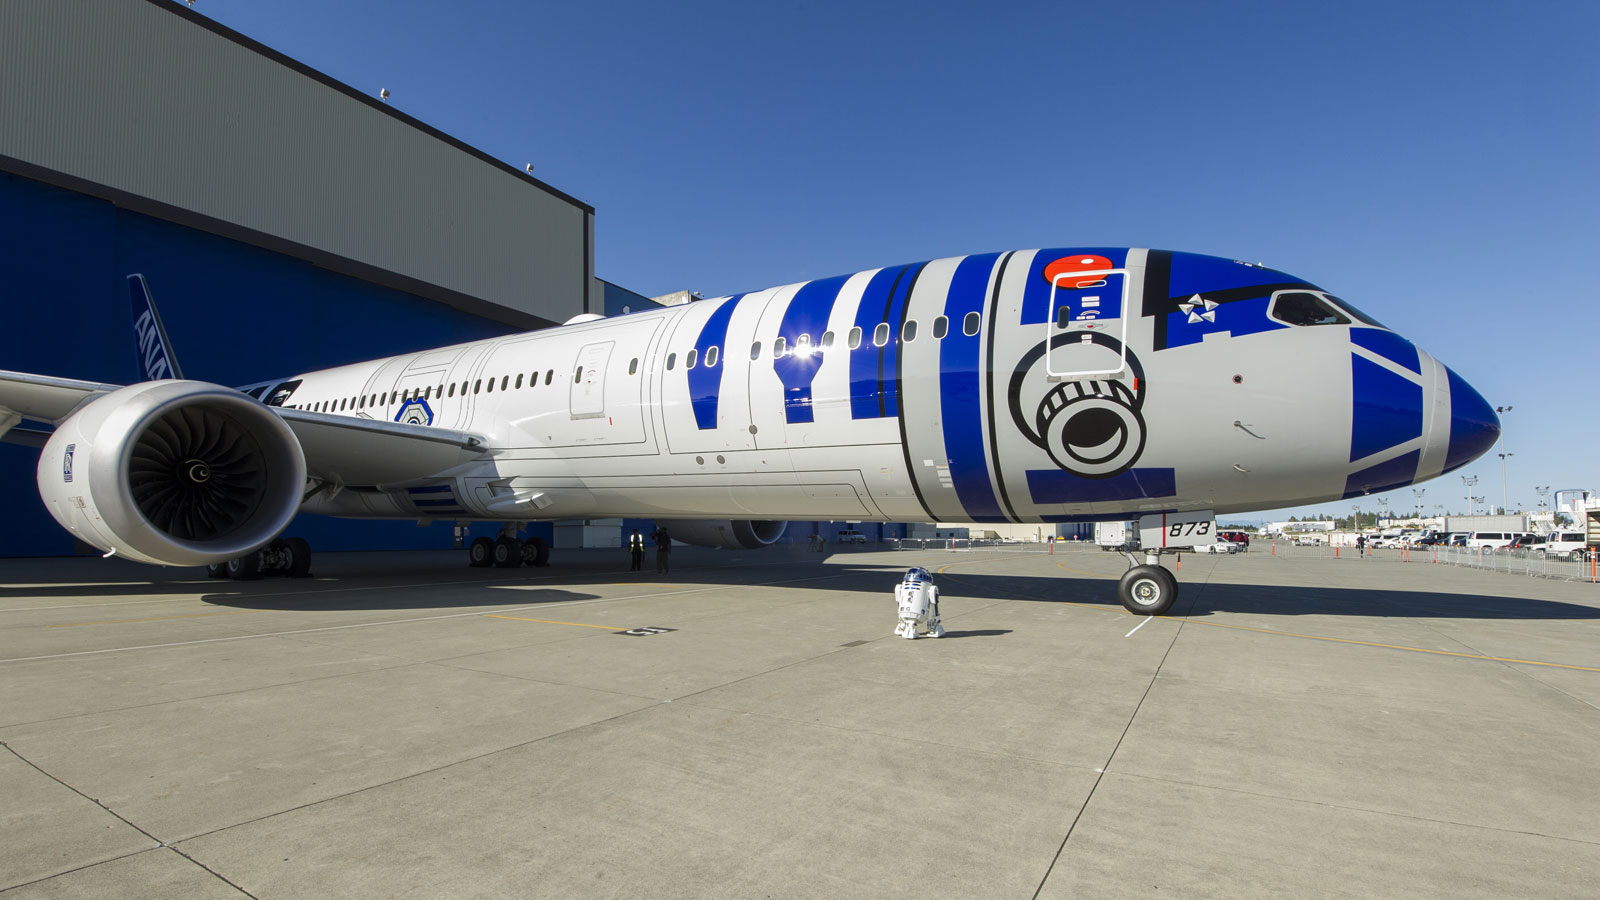 R2-D2 jet unveiled: The first ever 'Star Wars' plane | CNN Travel